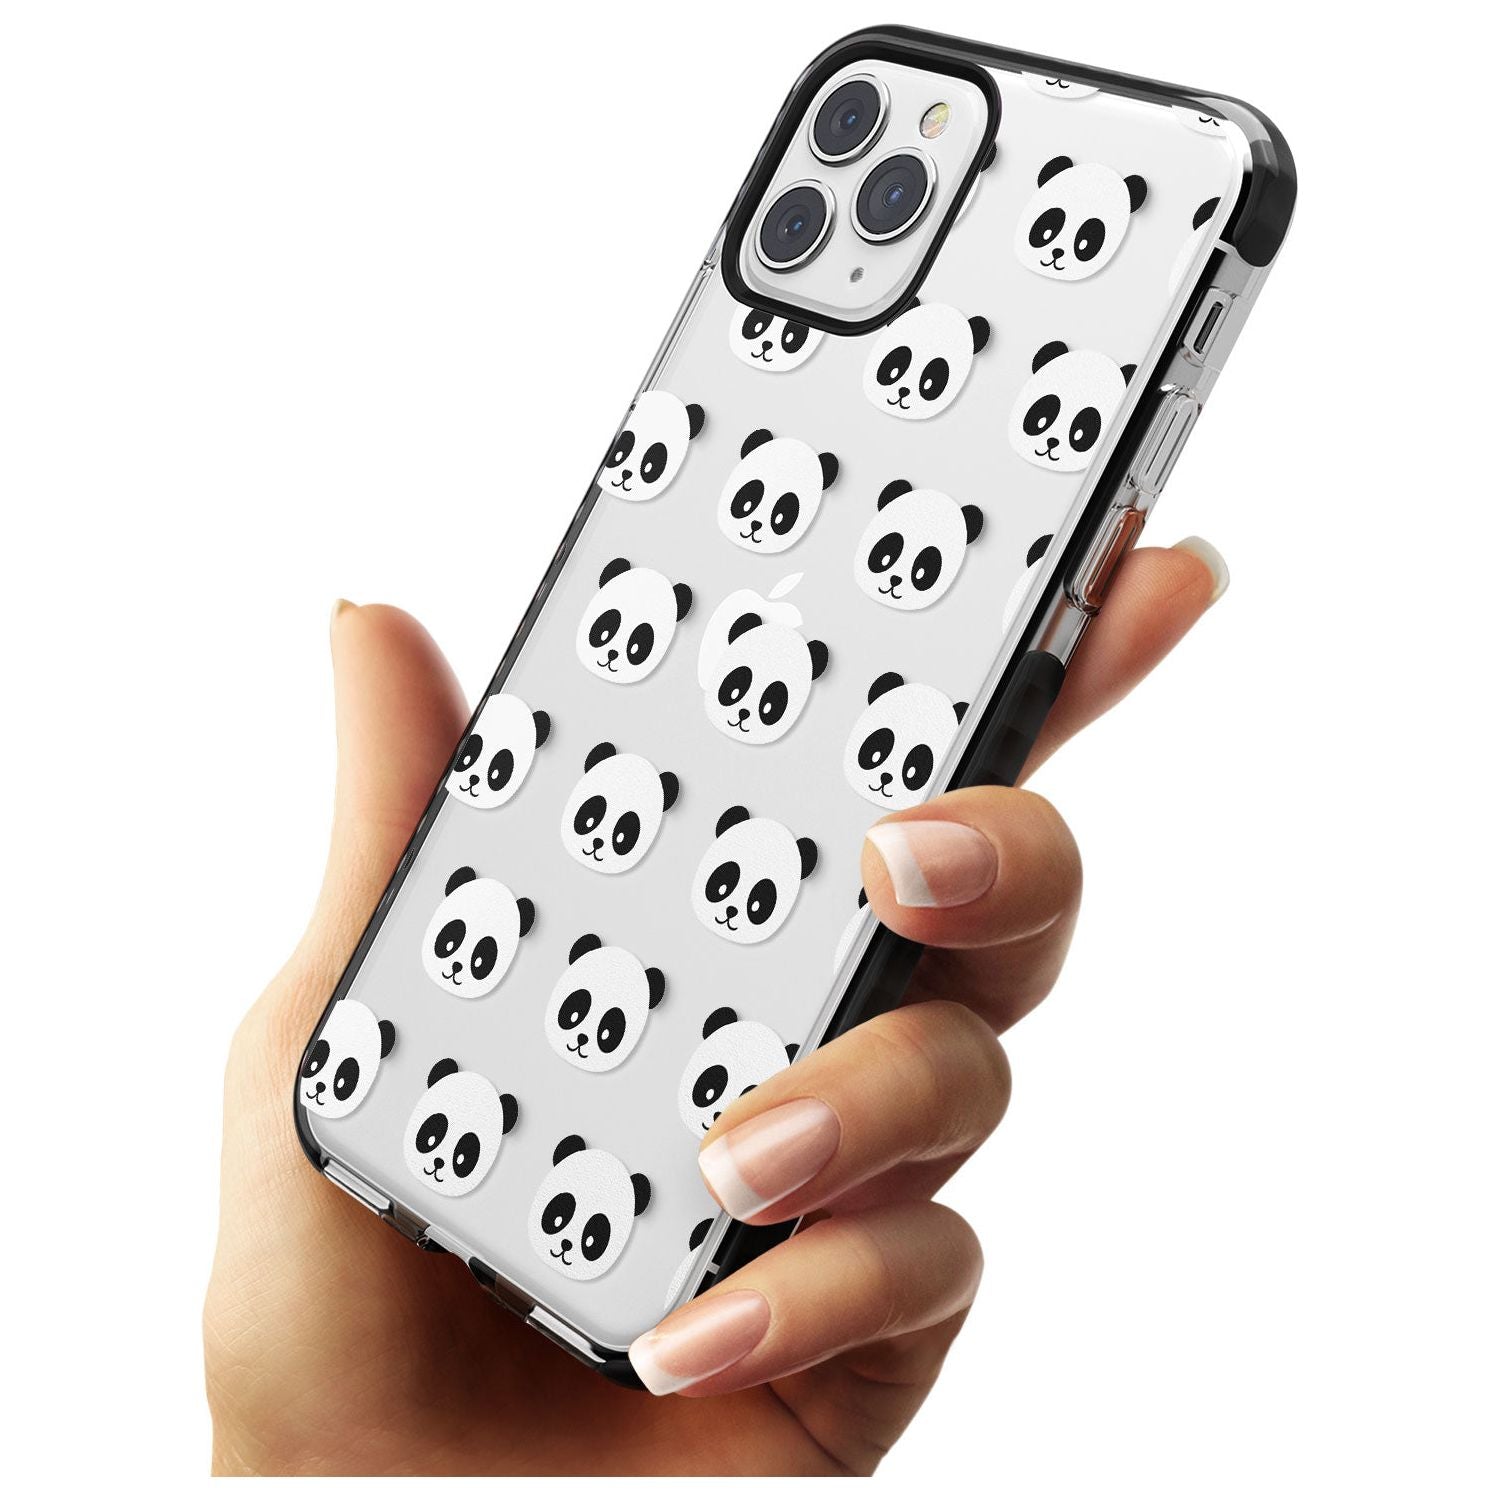 Panda Face Pattern Pink Fade Impact Phone Case for iPhone 11